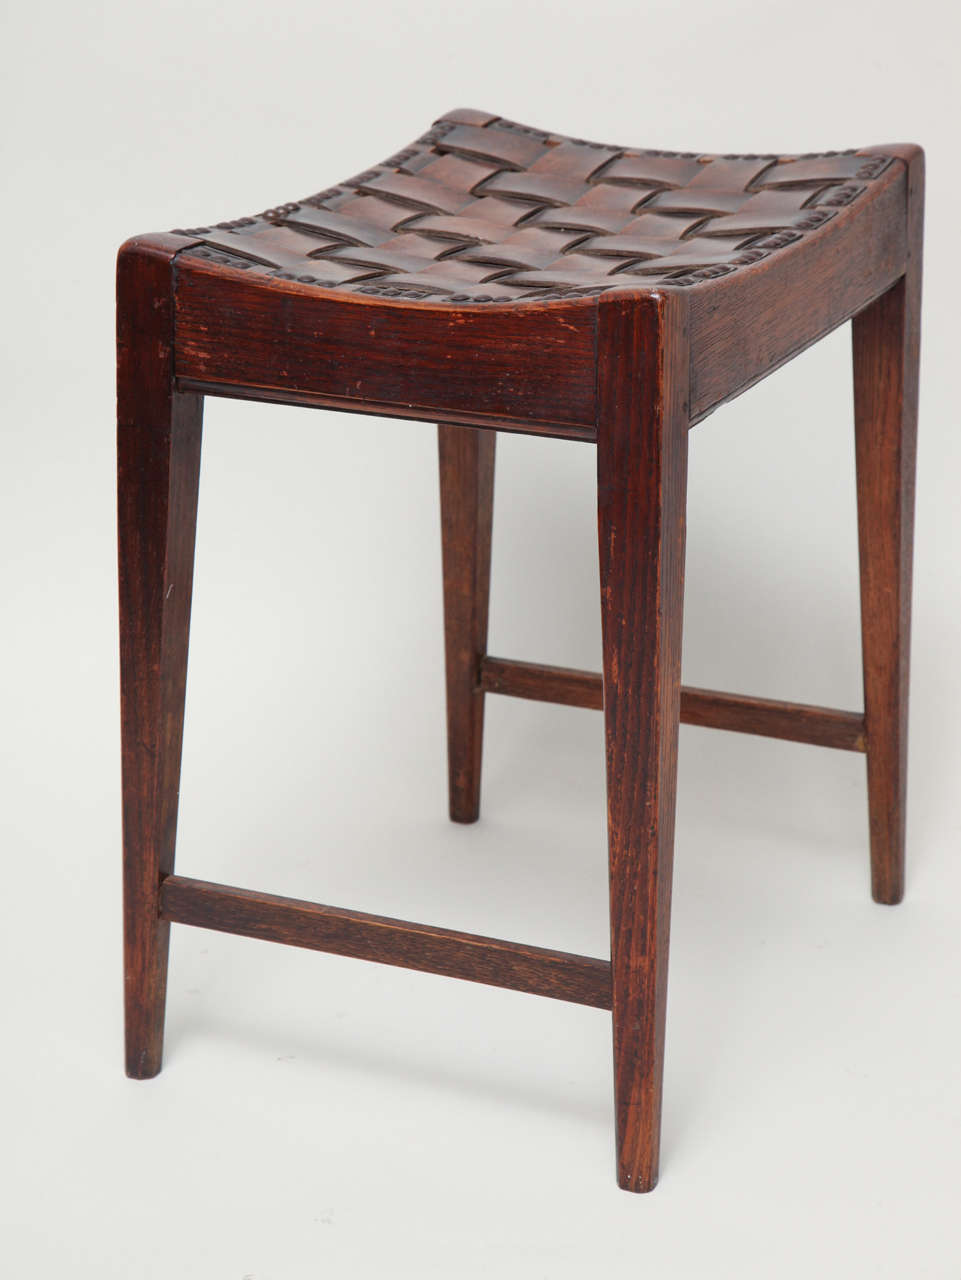 English Arts and Crafts Stool by Arthur Simpson of Kendall 1